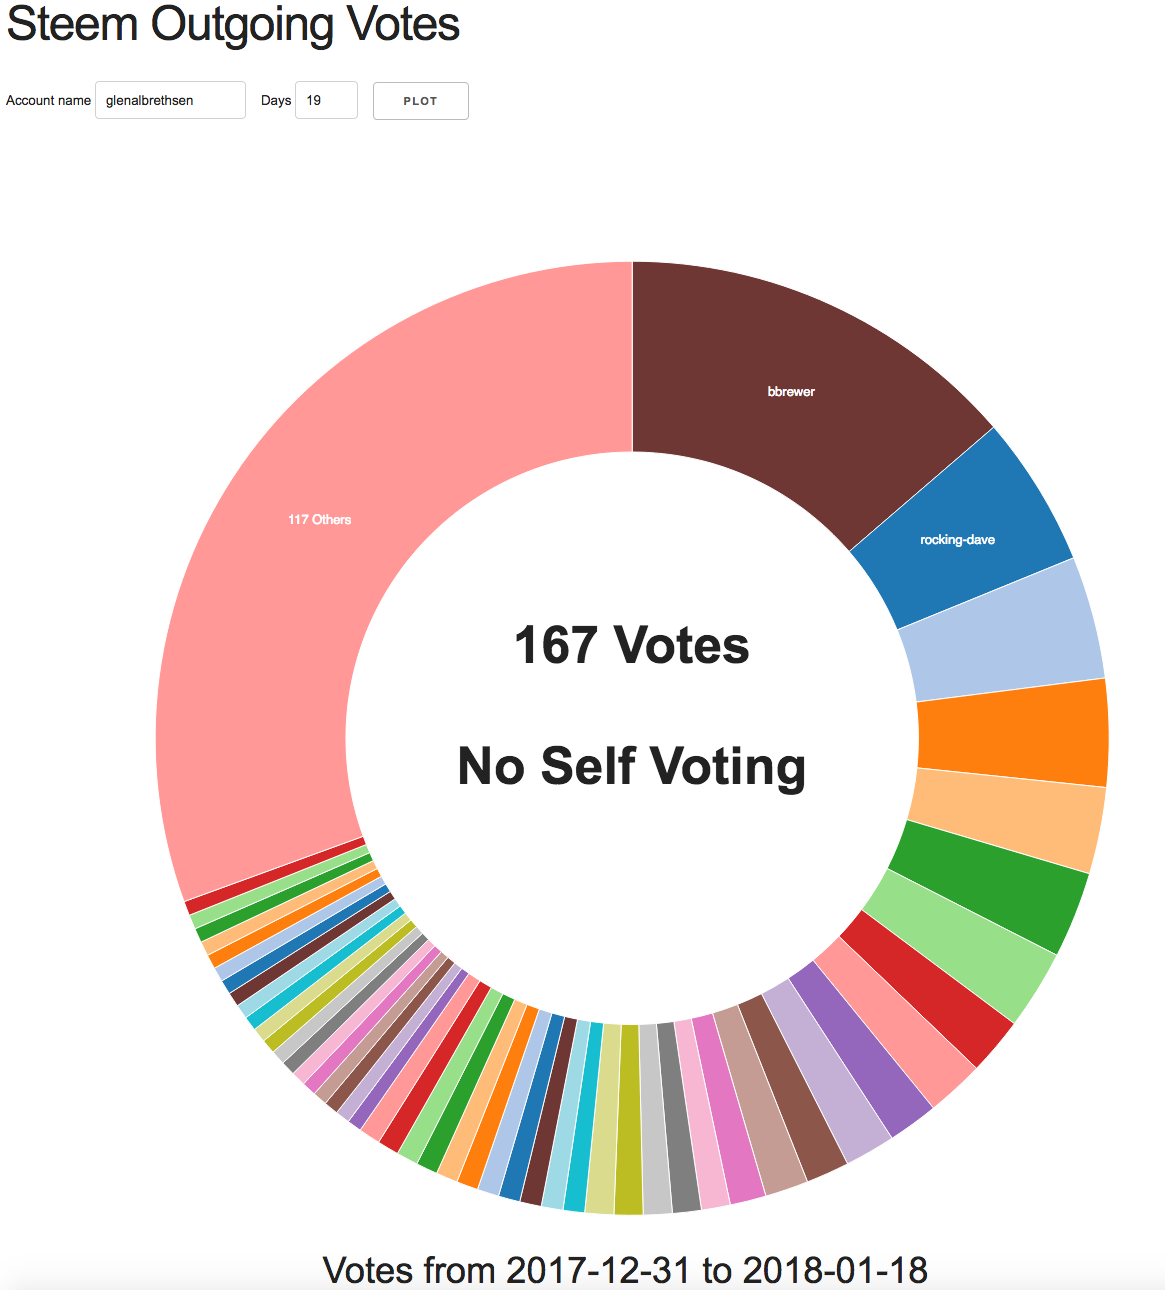 18 days of Outvoting on Steemit.png